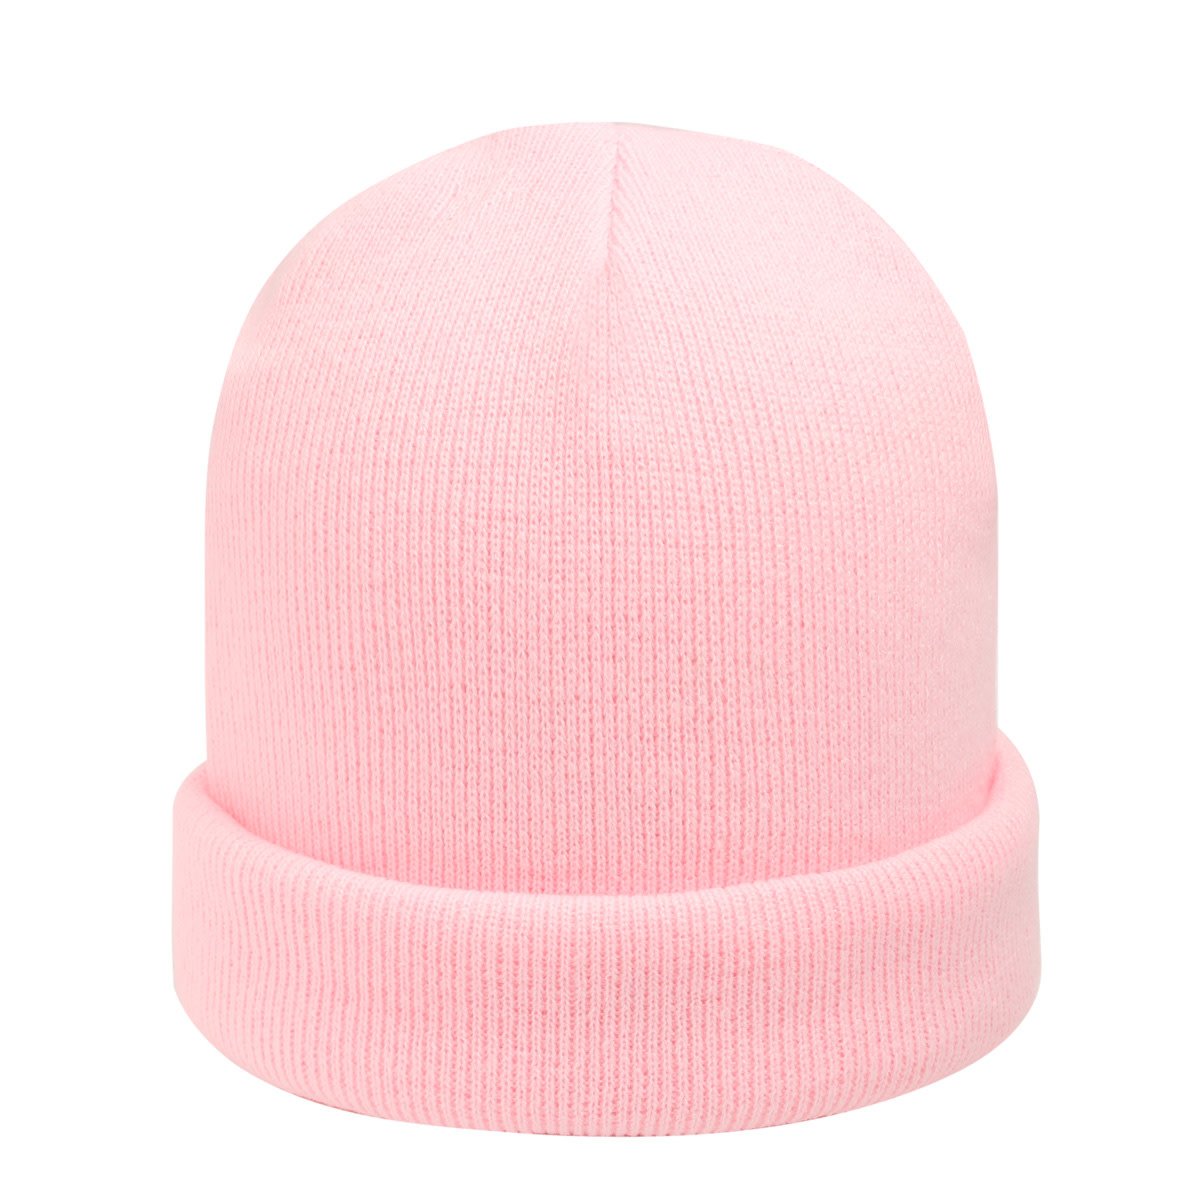 With love Beanie rainbow colors - light pink